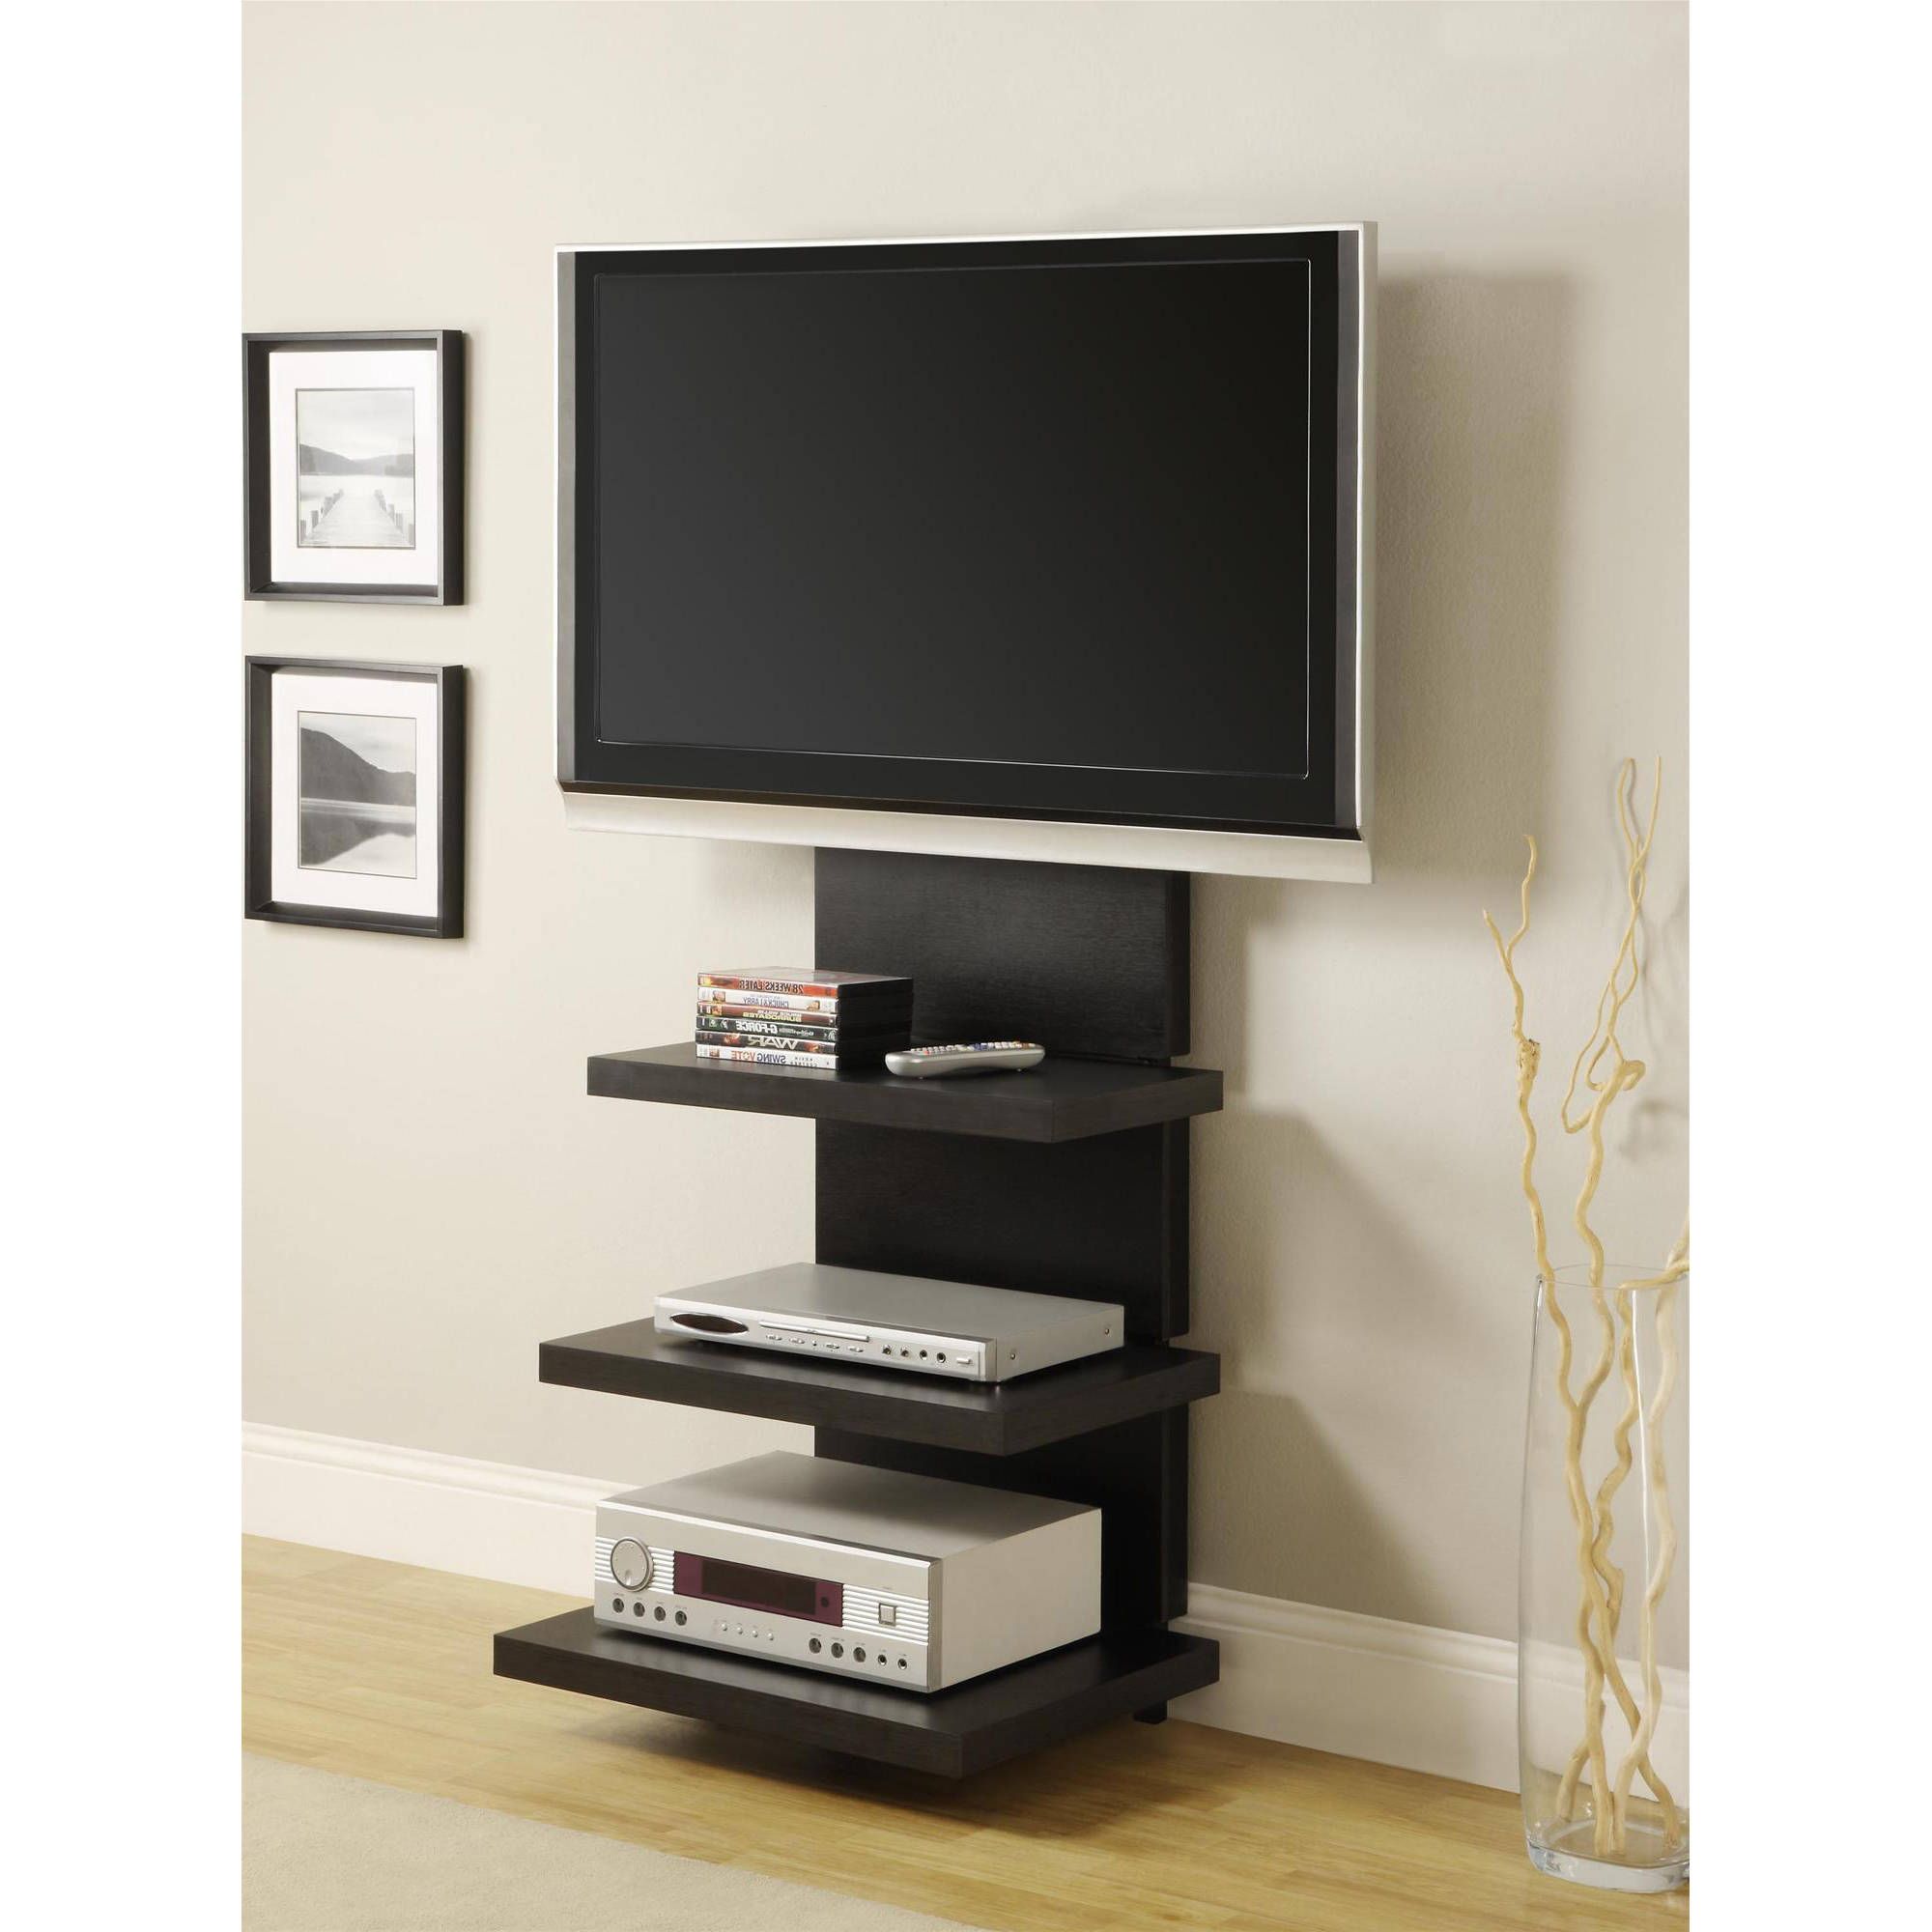 Famous Ameriwood Home Elevation Altramount Tv Stand For Tvs Up To 60" Wide Intended For Bedroom Tv Shelves (View 7 of 20)